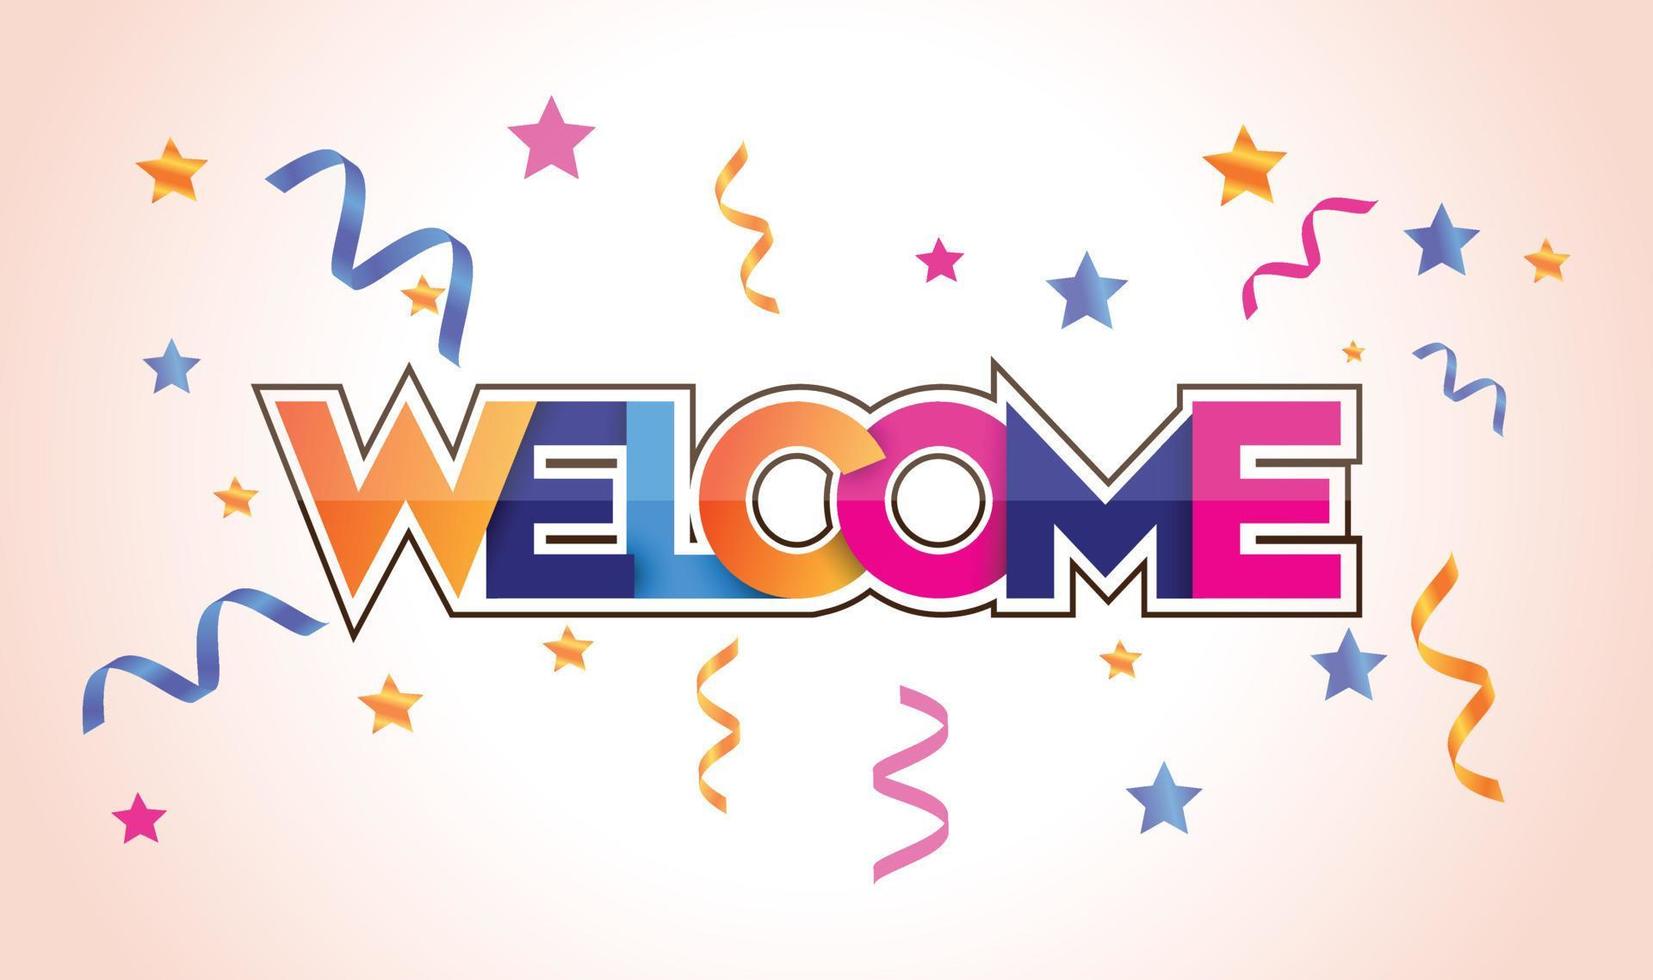 Modern Welcome Text Banner, And Effect. Colorful Design With White Background And Gradient Background, Free Vector File Downloadable.